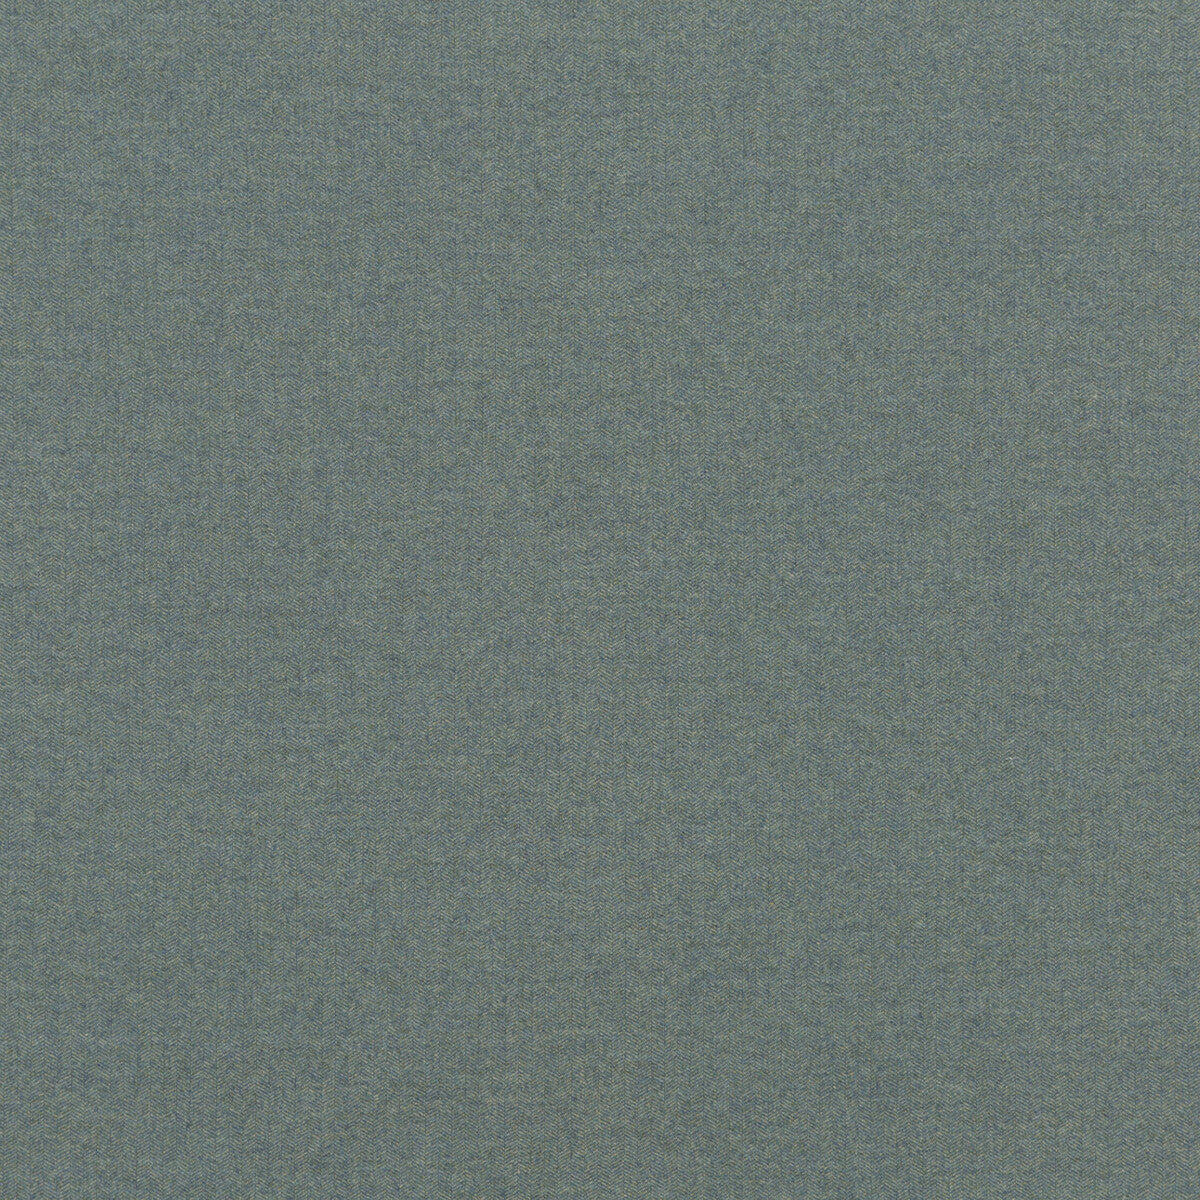 Leith fabric in teal color - pattern FD751.R11.0 - by Mulberry in the Festival collection